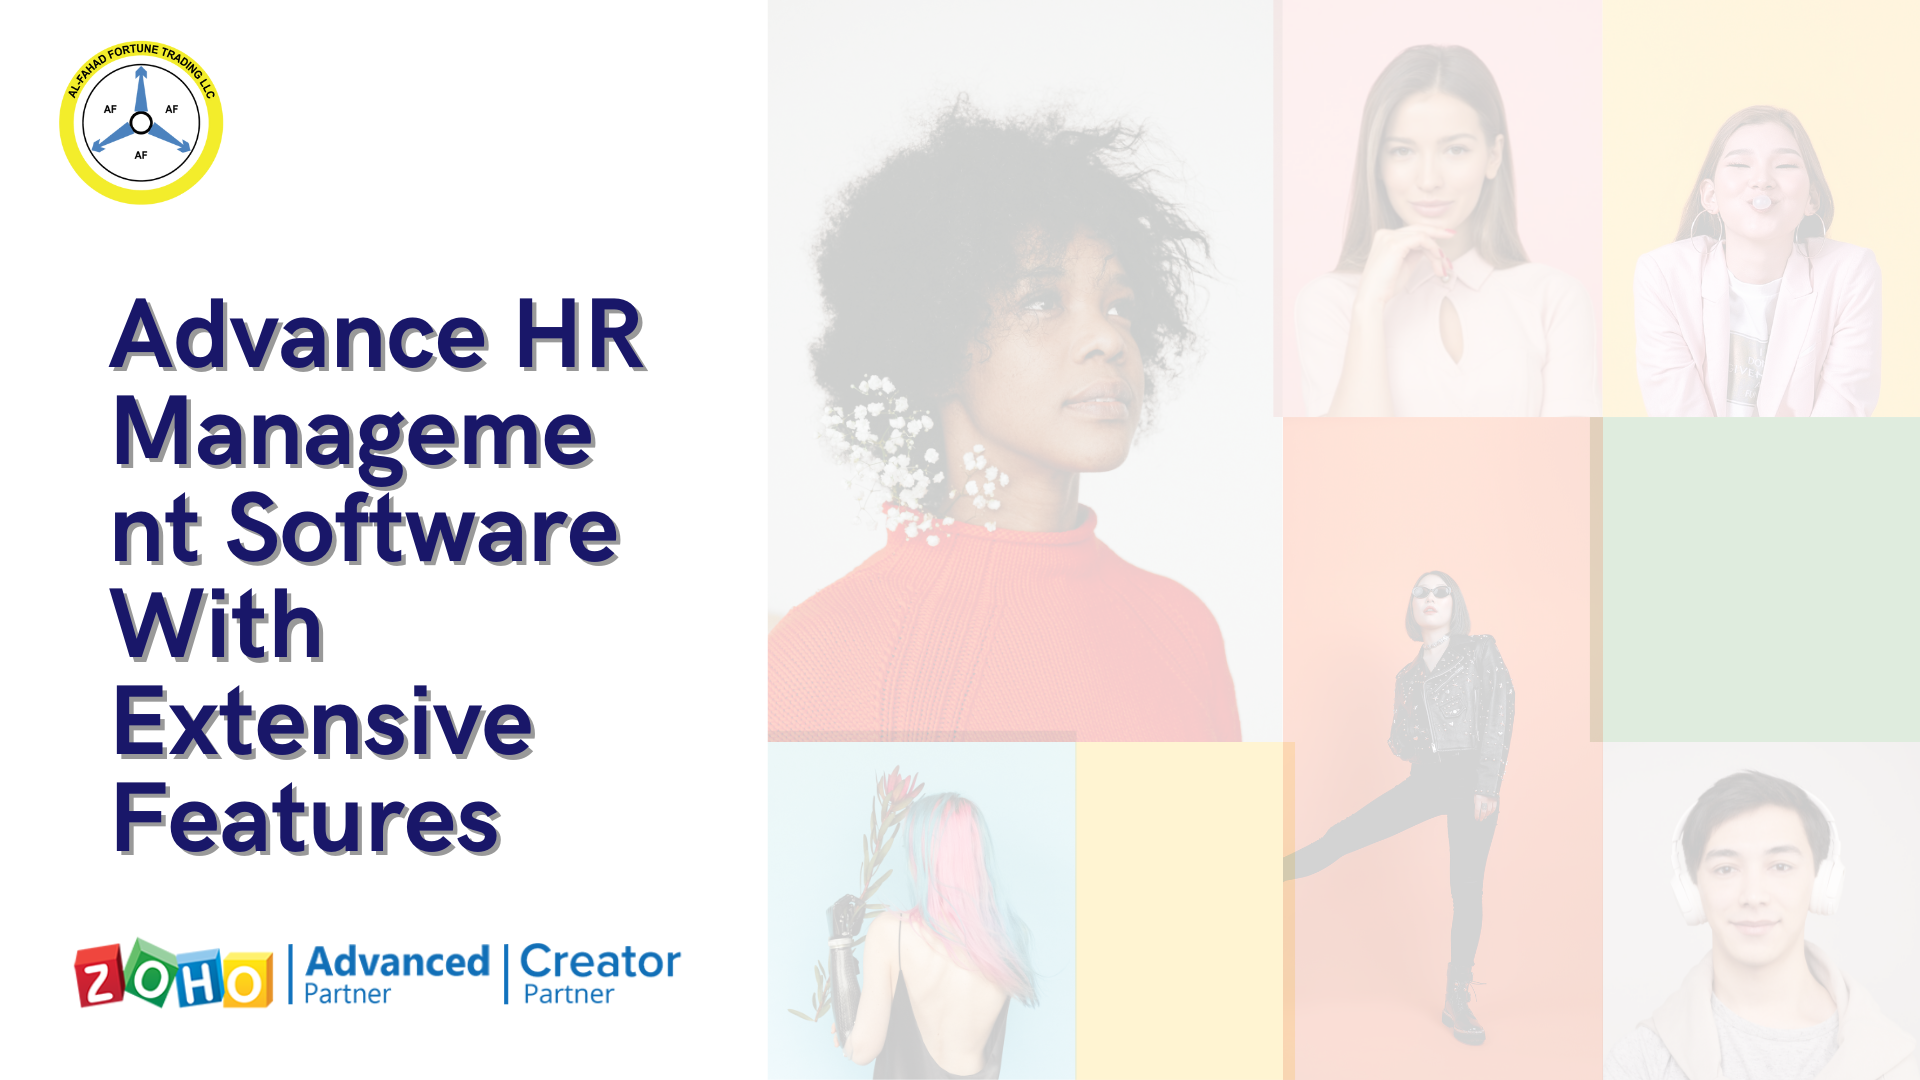 Advance HR Management Software With Extensive Features - Zoho People